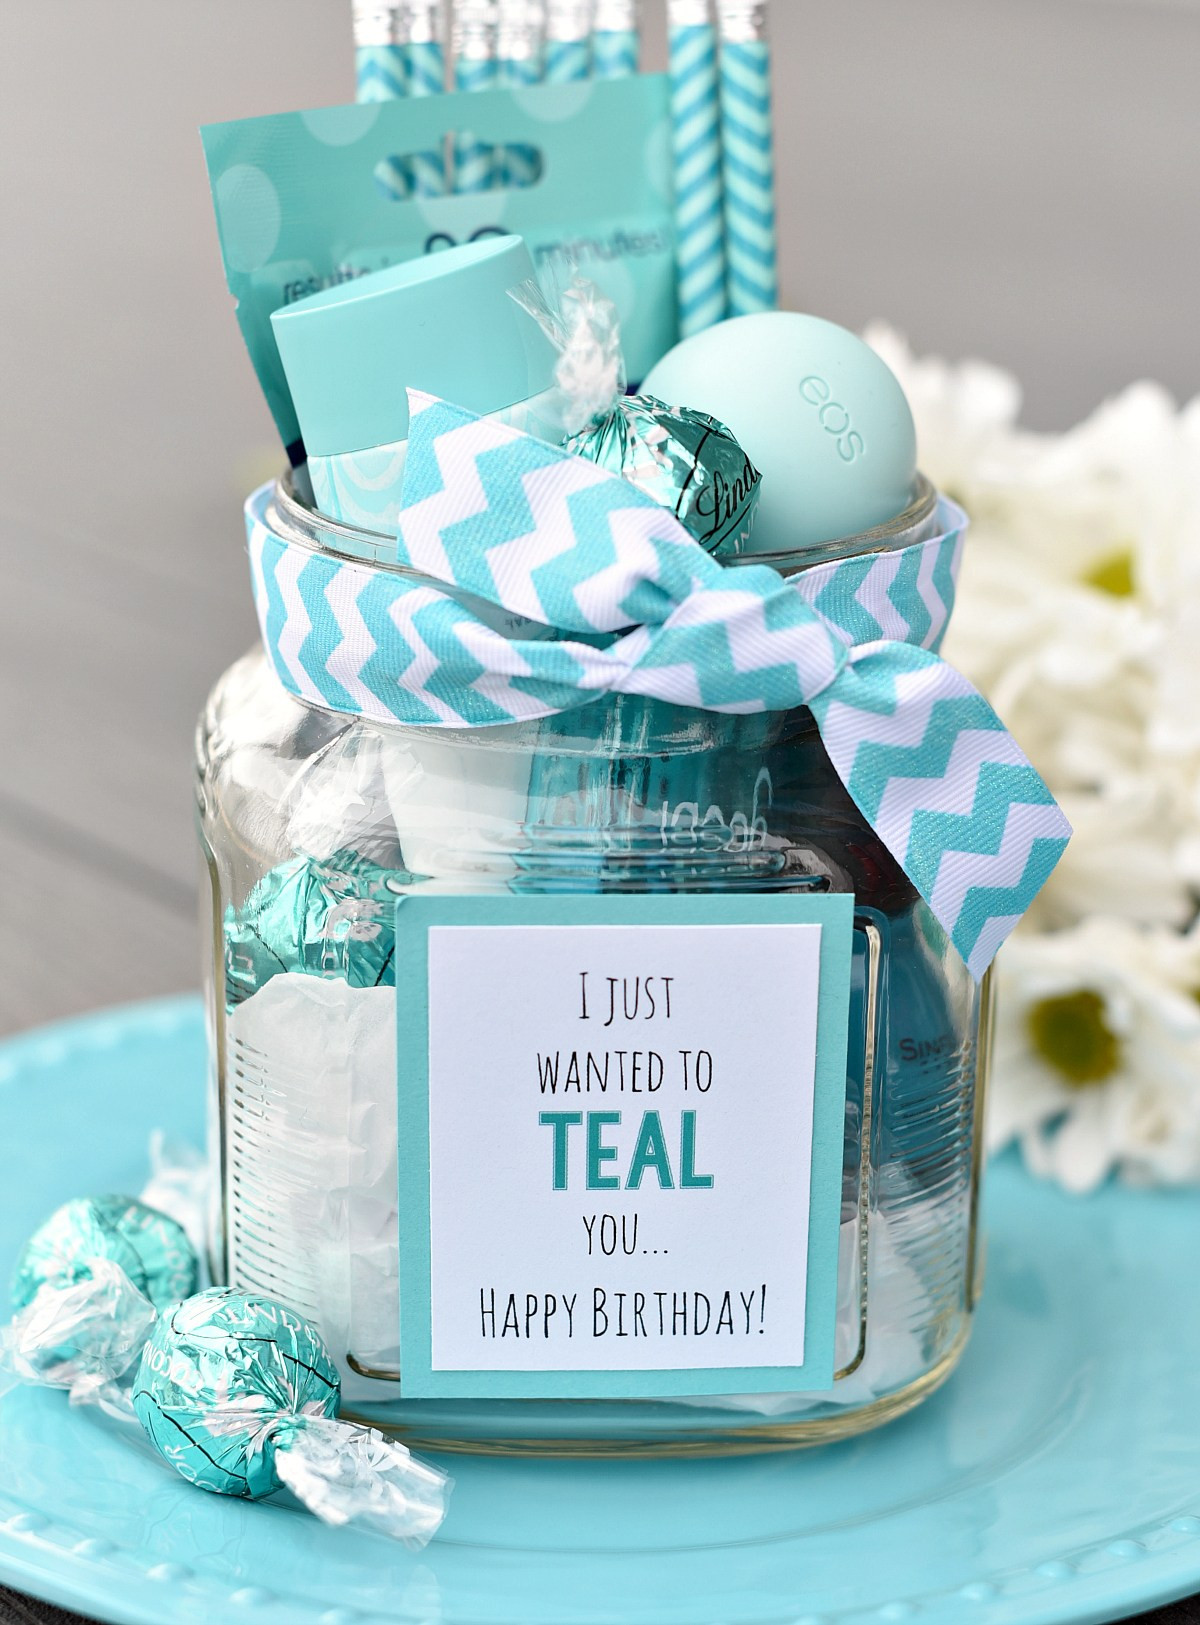 Cute Birthday Gifts For Friends
 Teal Birthday Gift Idea for Friends – Fun Squared